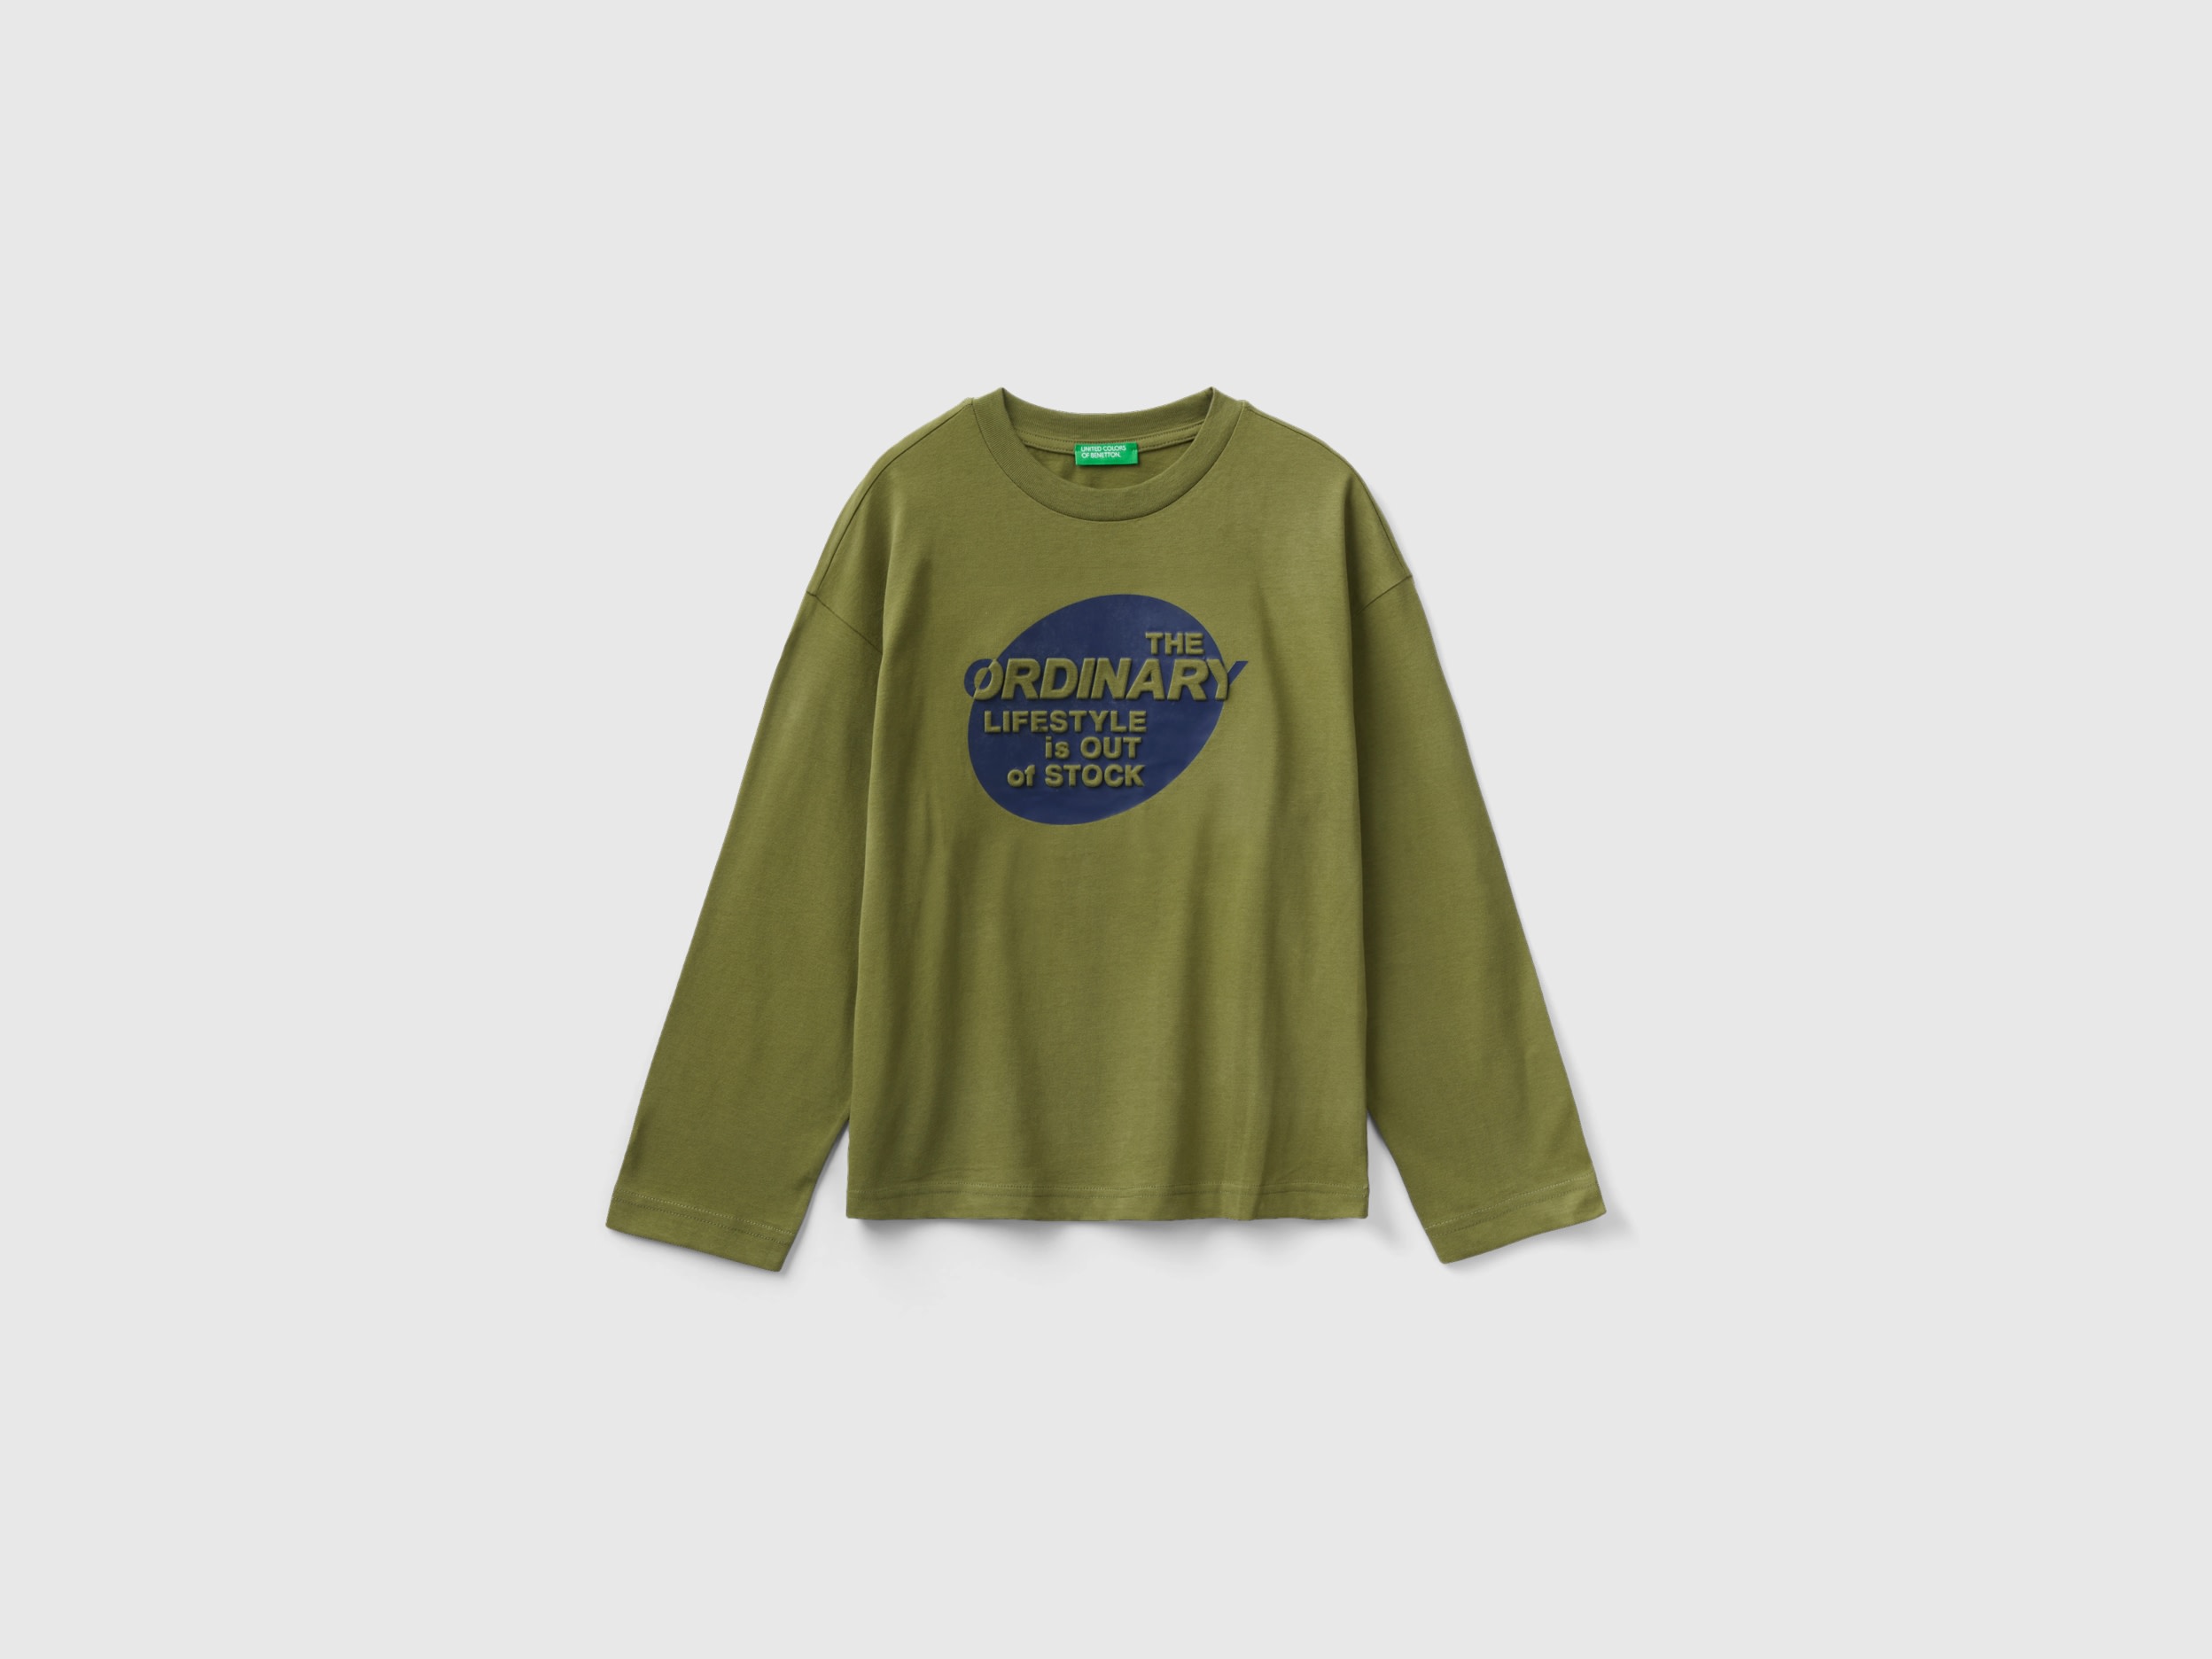 Benetton, T-shirt In Warm Cotton With Print, size 2XL, Military Green, Kids